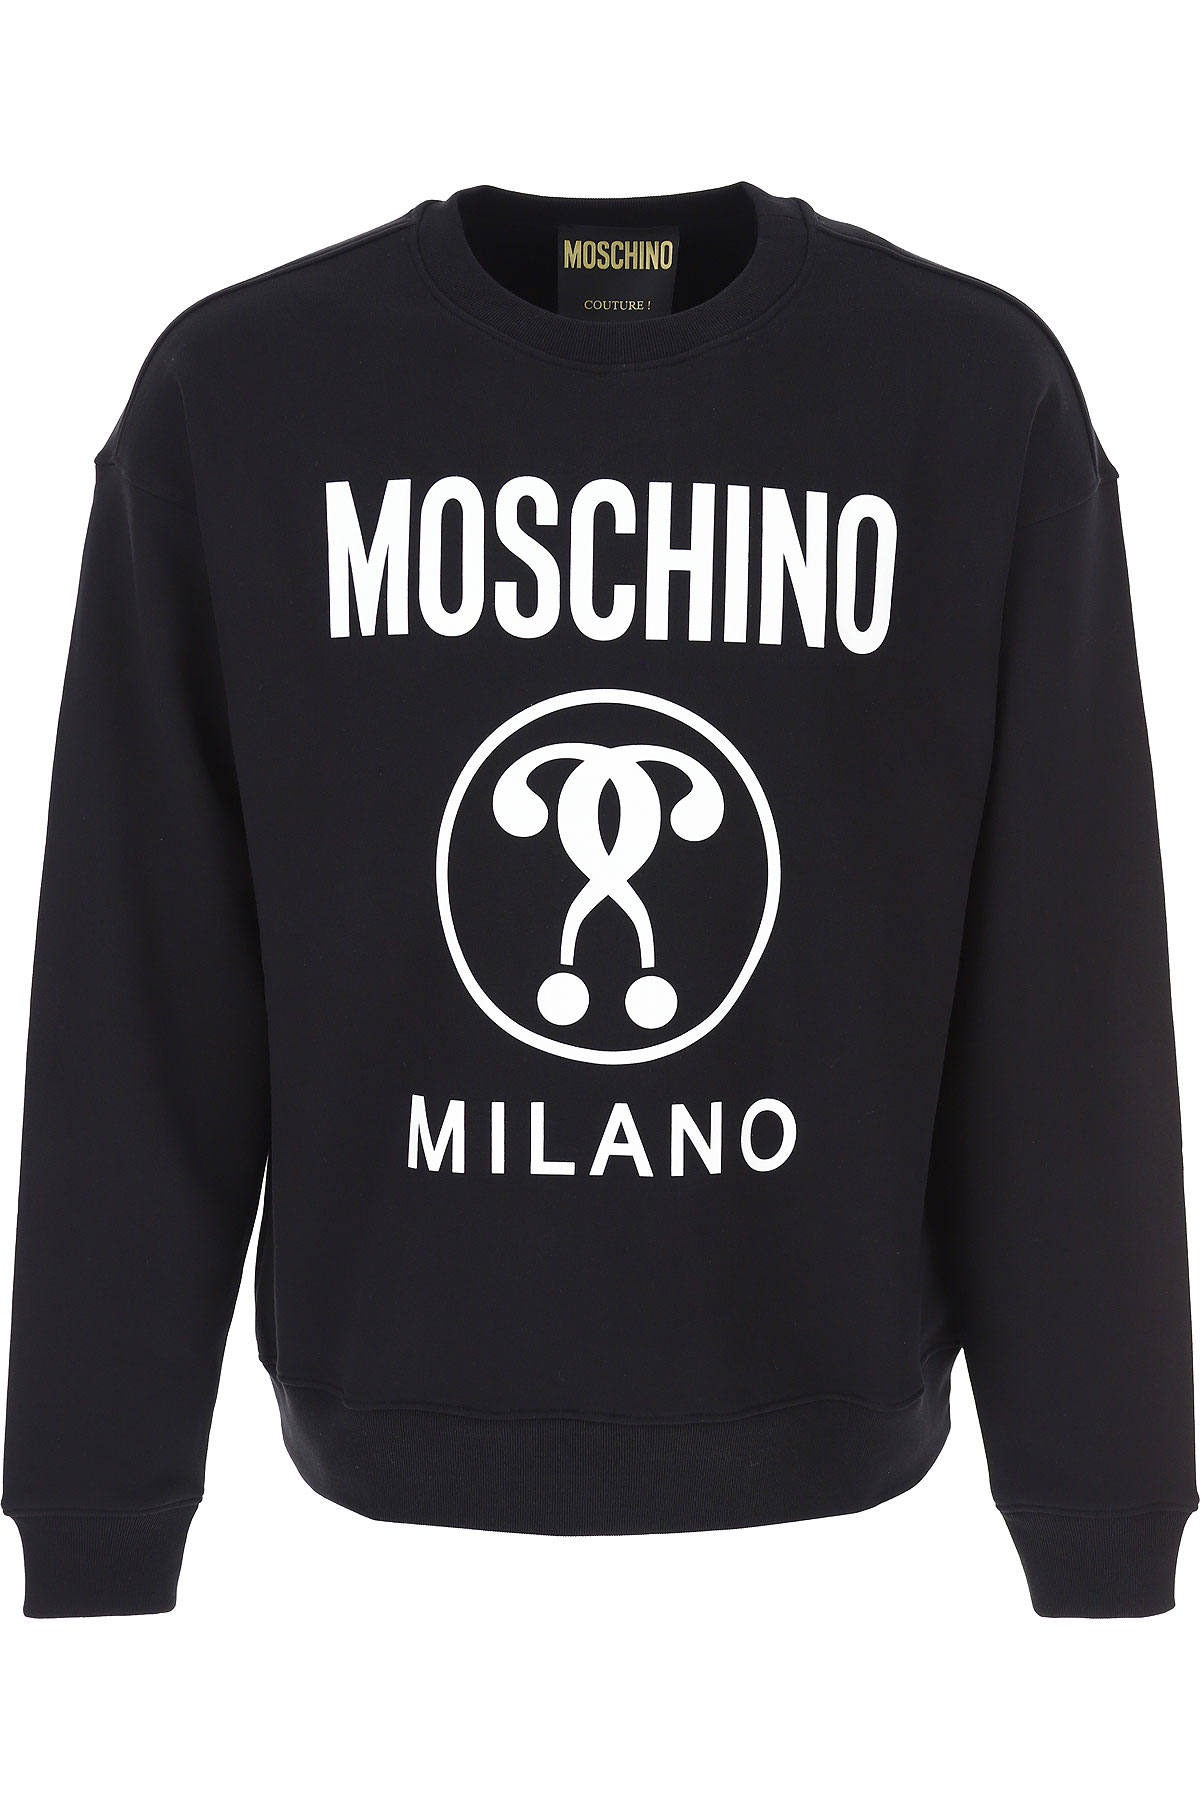 Mens Clothing Moschino, Style code: a1702-7028-1555